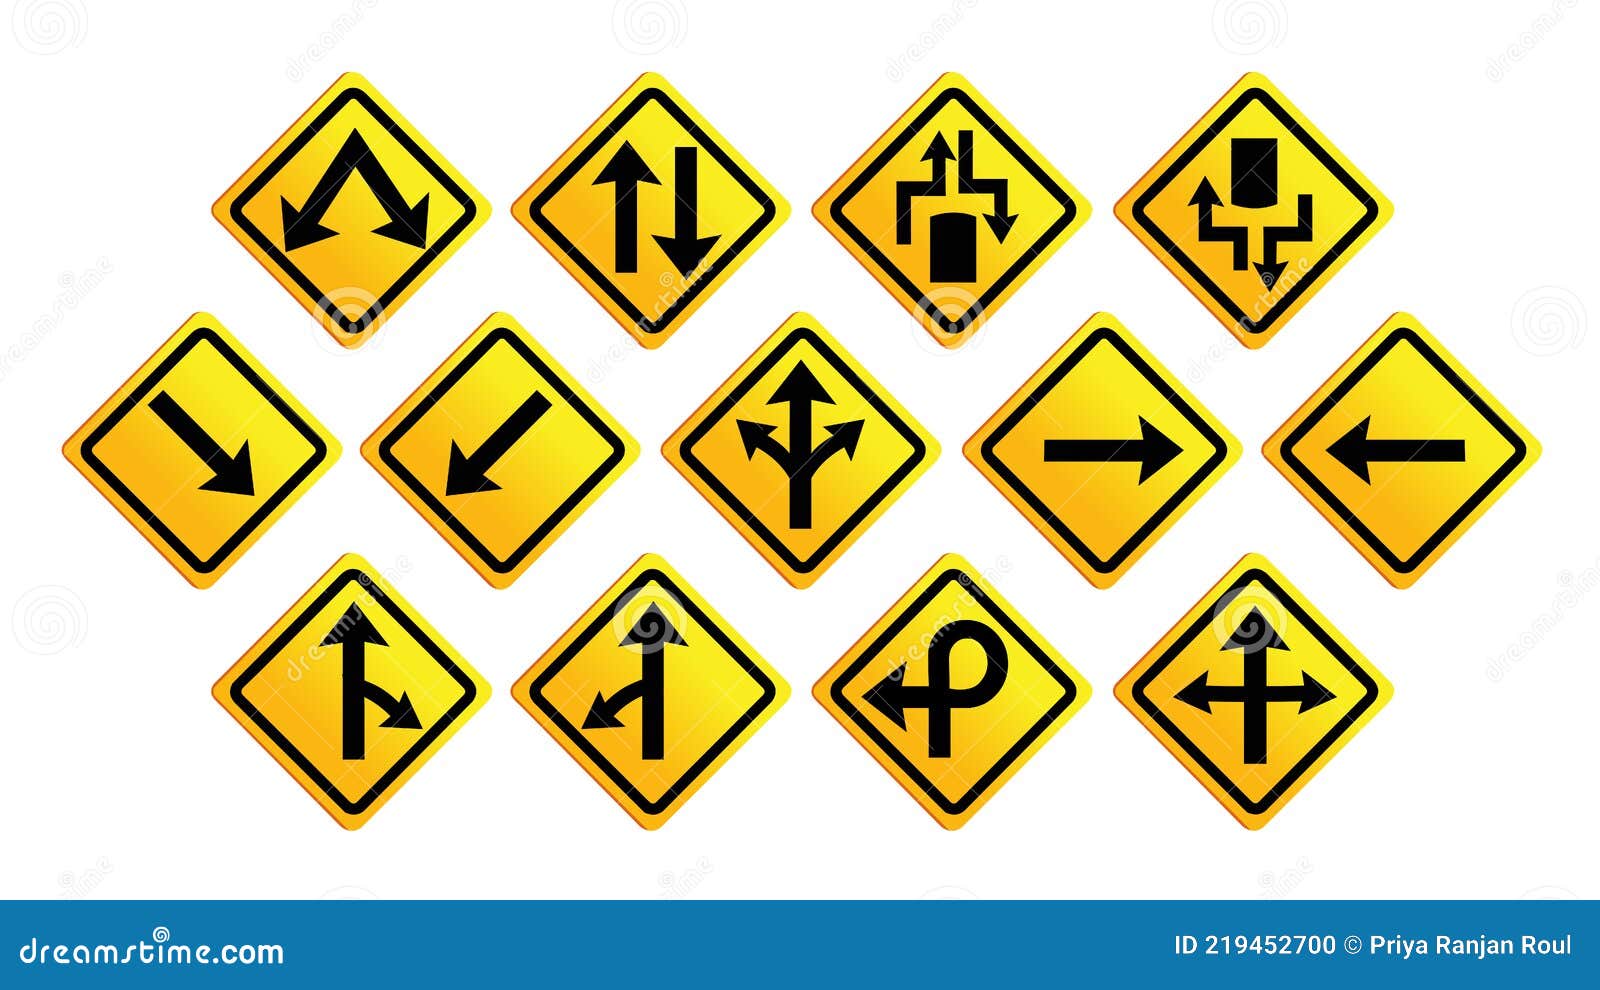 Traffic Safety Rules and Signs Vector Images Stock Vector ...